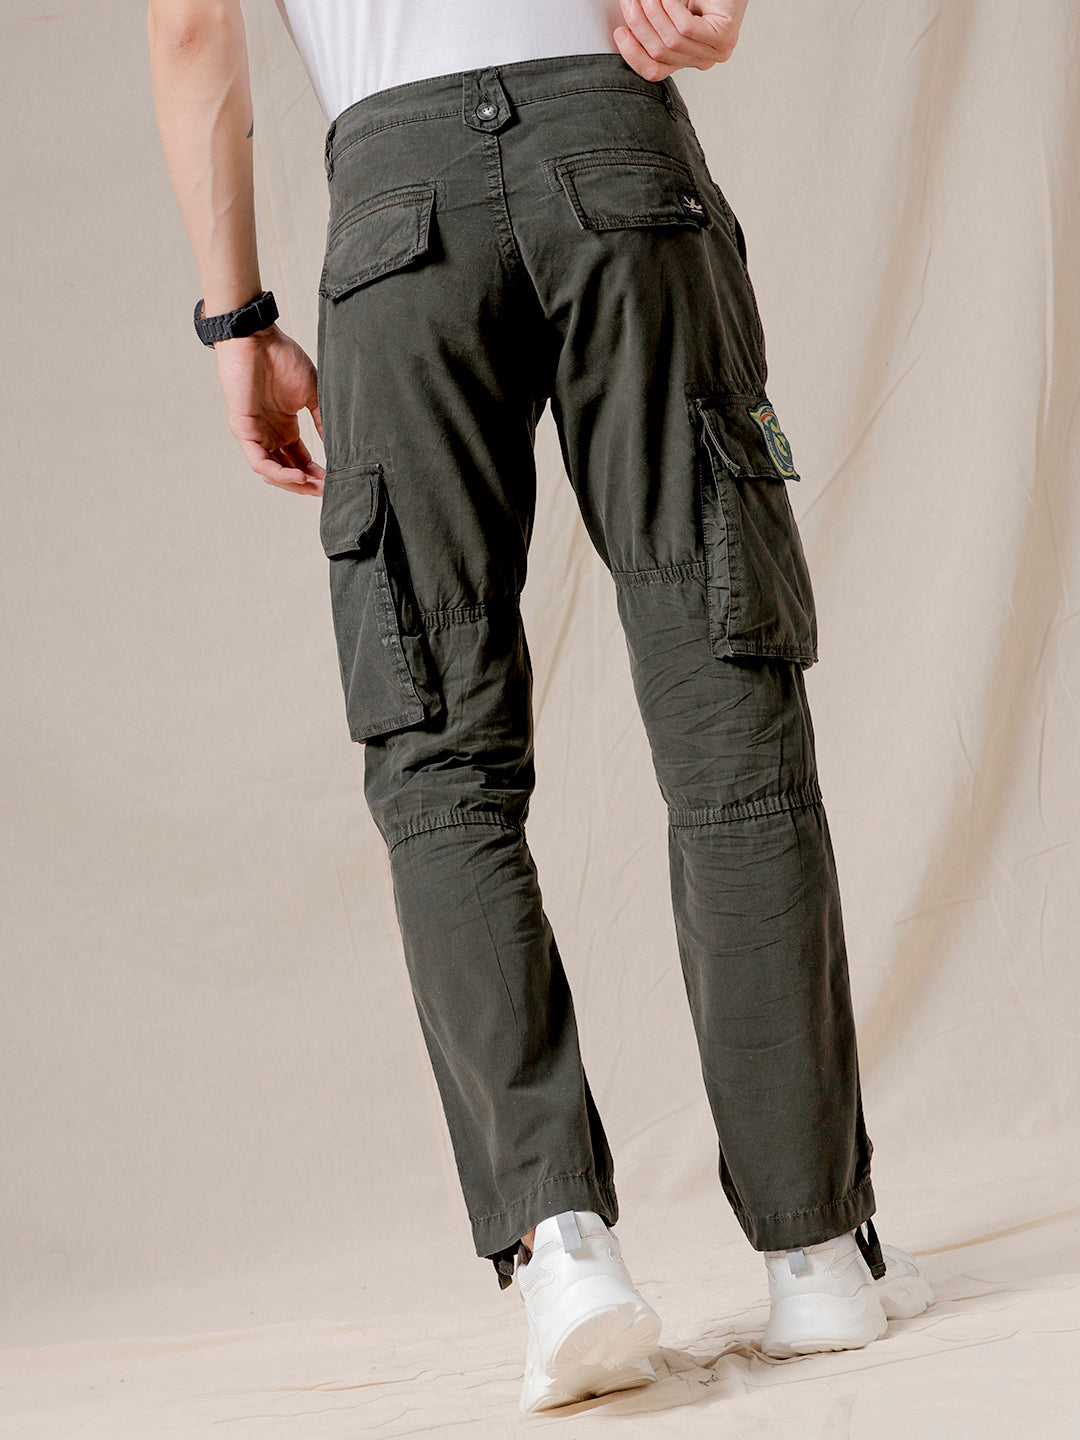 Indian Infantry By A47 Olive Drip Cargo Pants